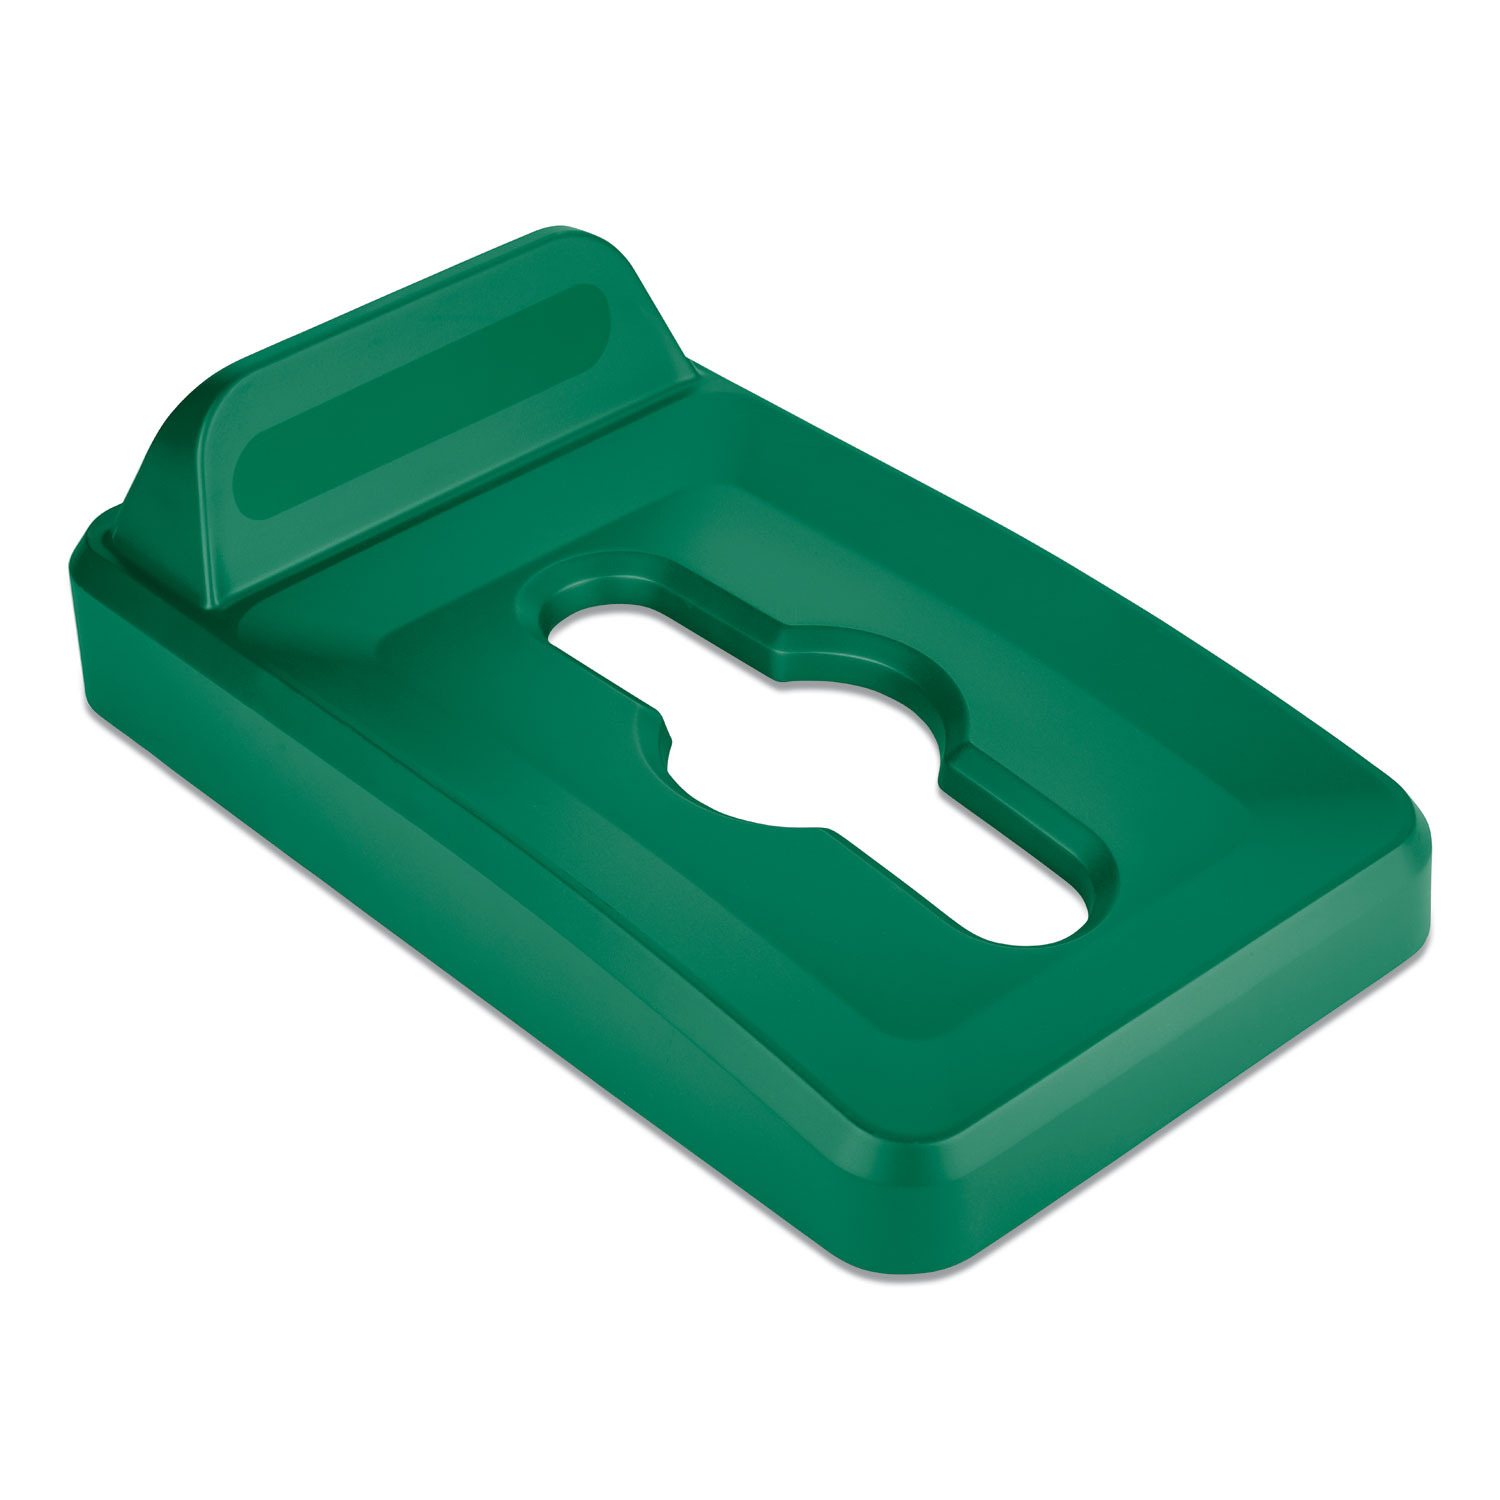 Rubbermaid® Commercial Slim Jim Single Stream Recycling Top for Slim Jim Containers, 11.52 x 20.43 x 2.8, Green